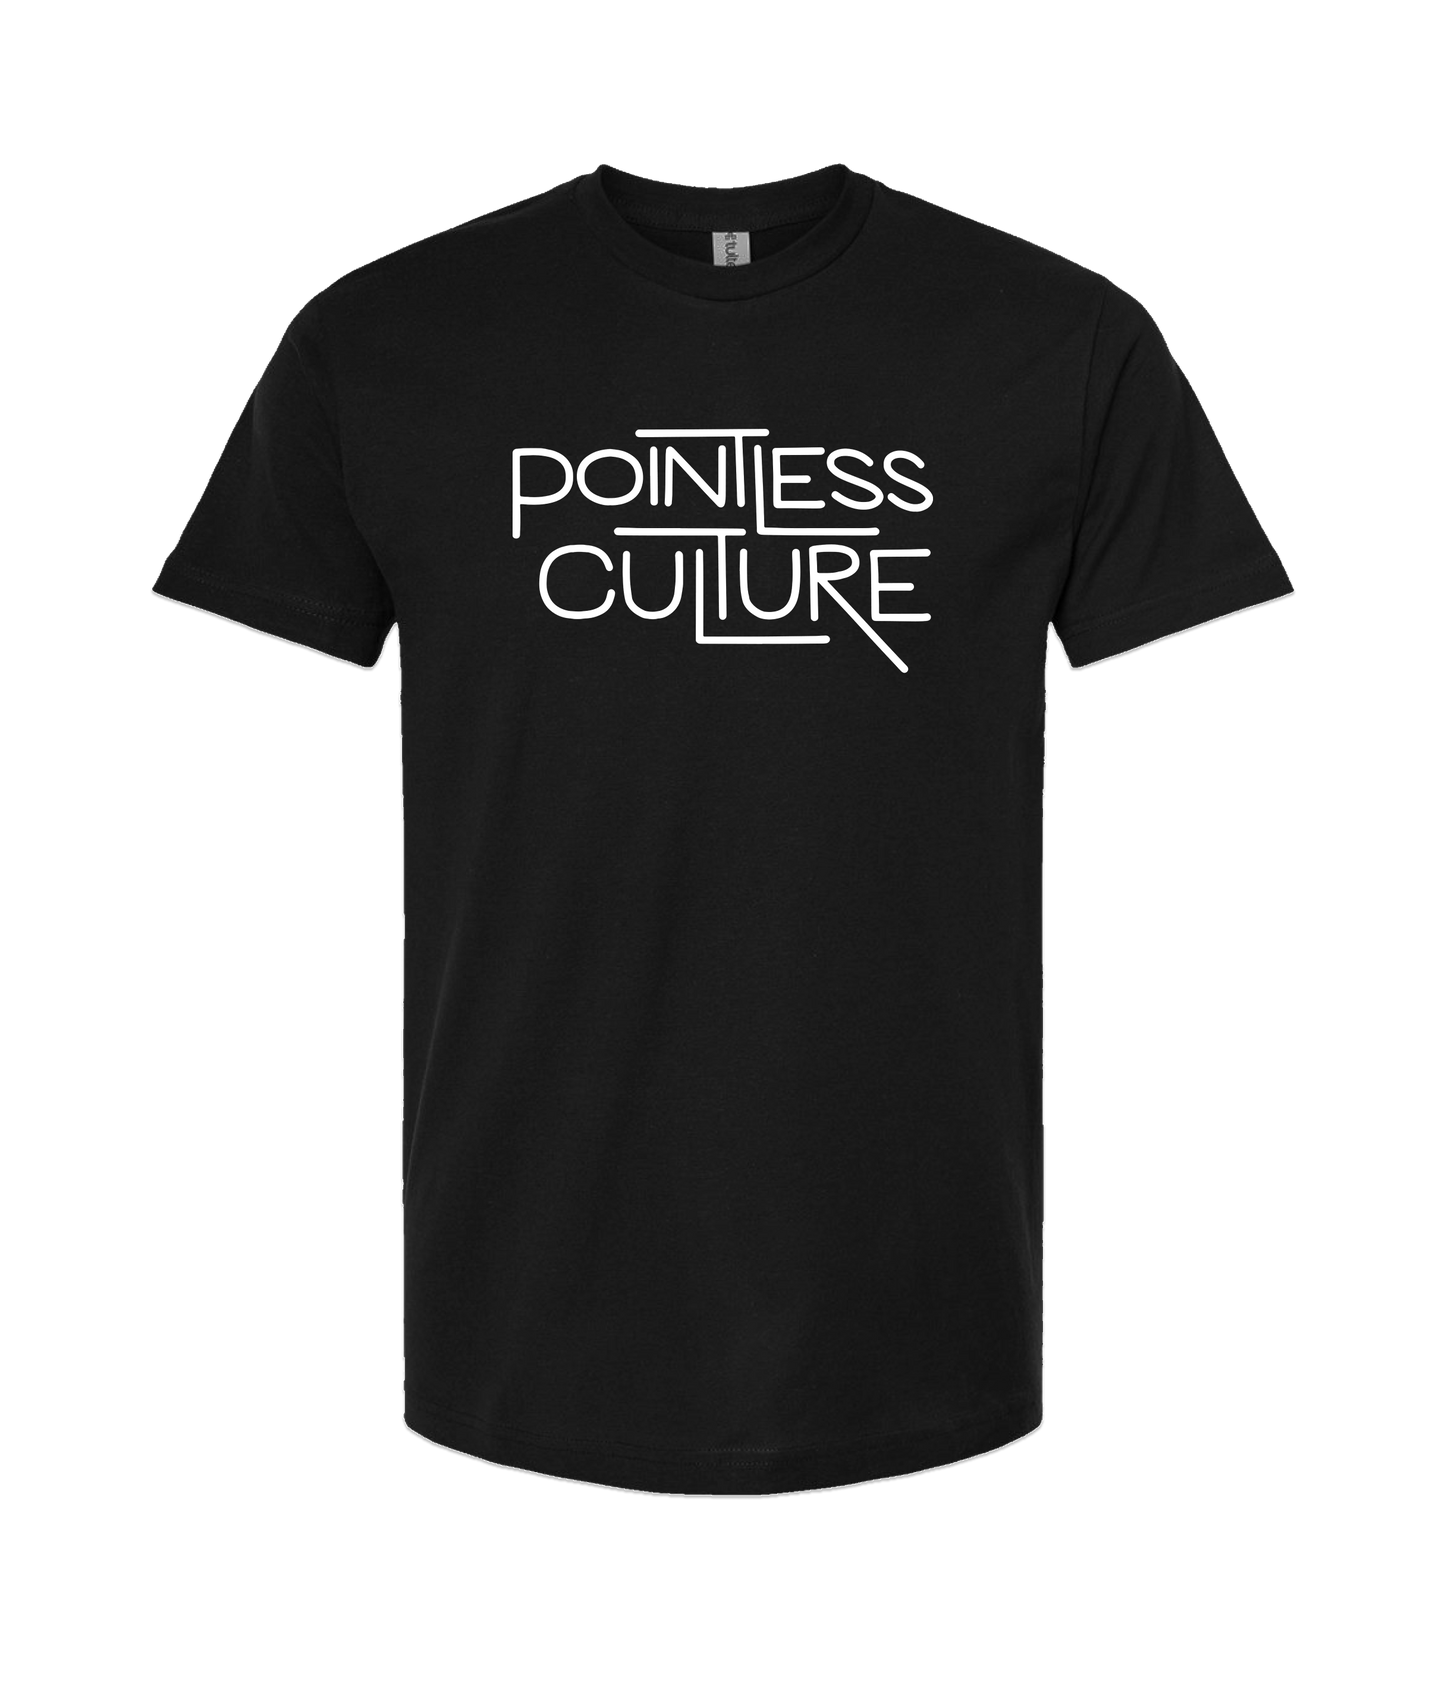 Pointless Culture - Pointless Culture - Black T-Shirt